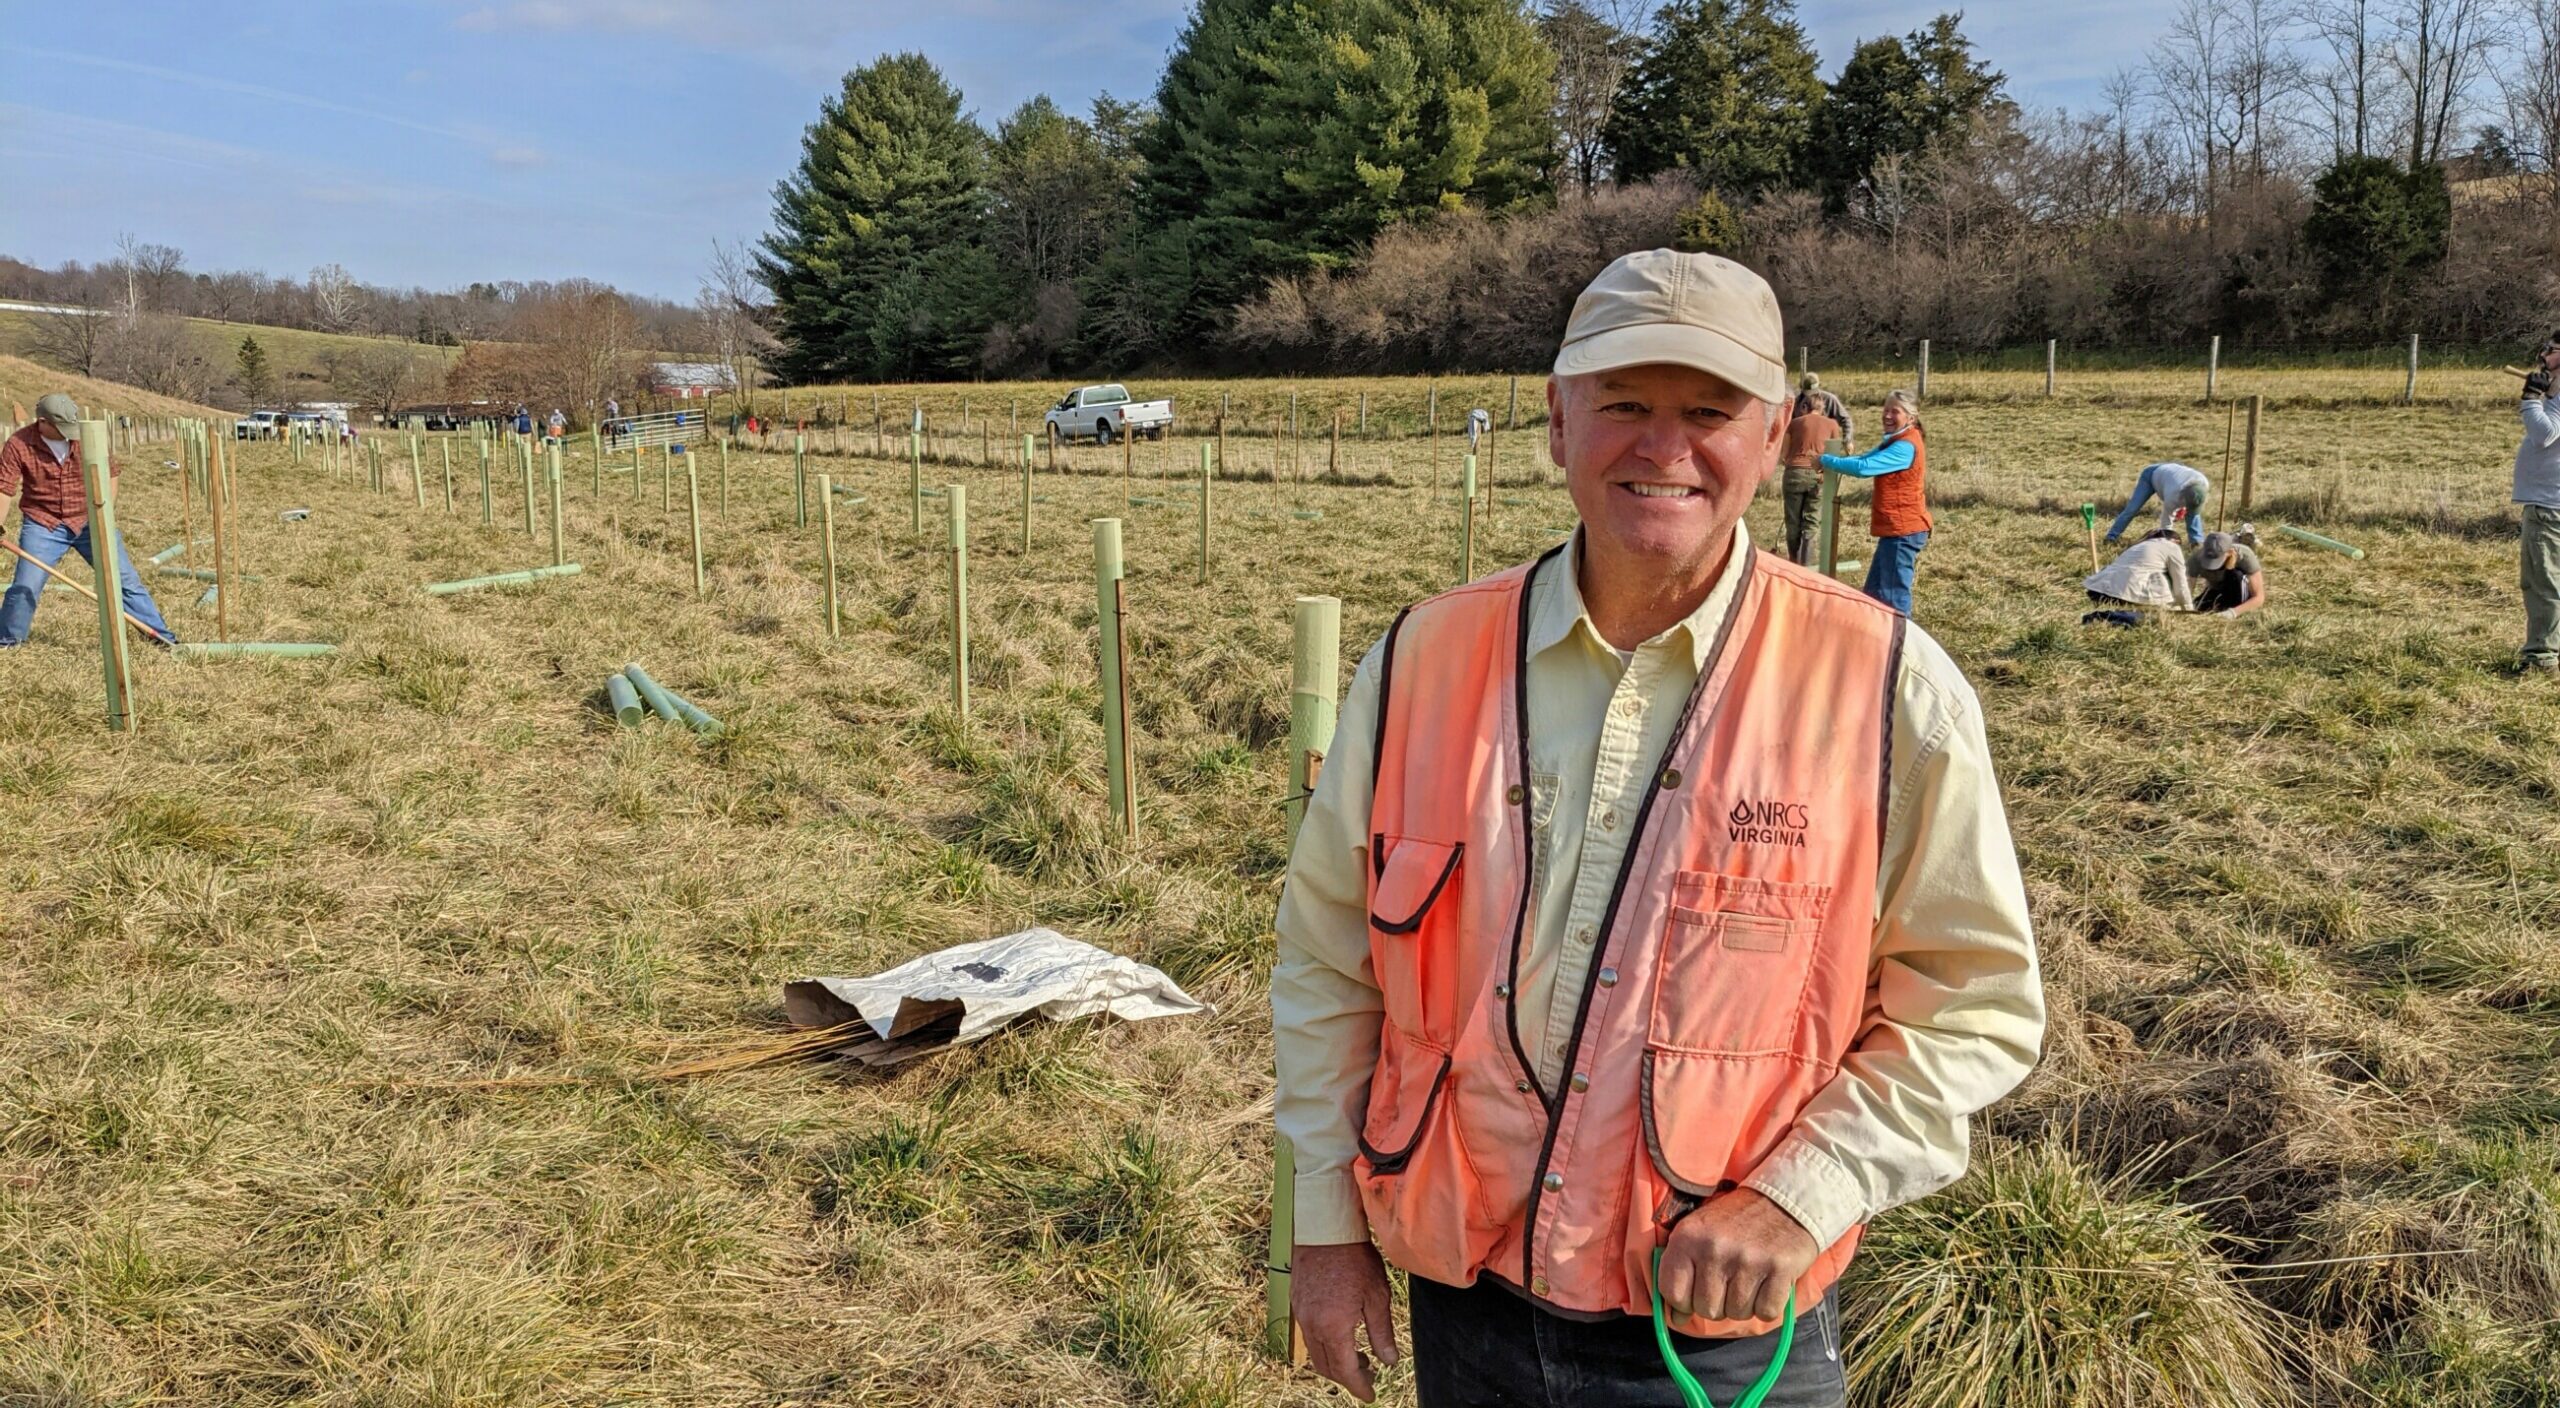 Bobby Whitescarver standing in his field with volunteers planting seedlings in the background.